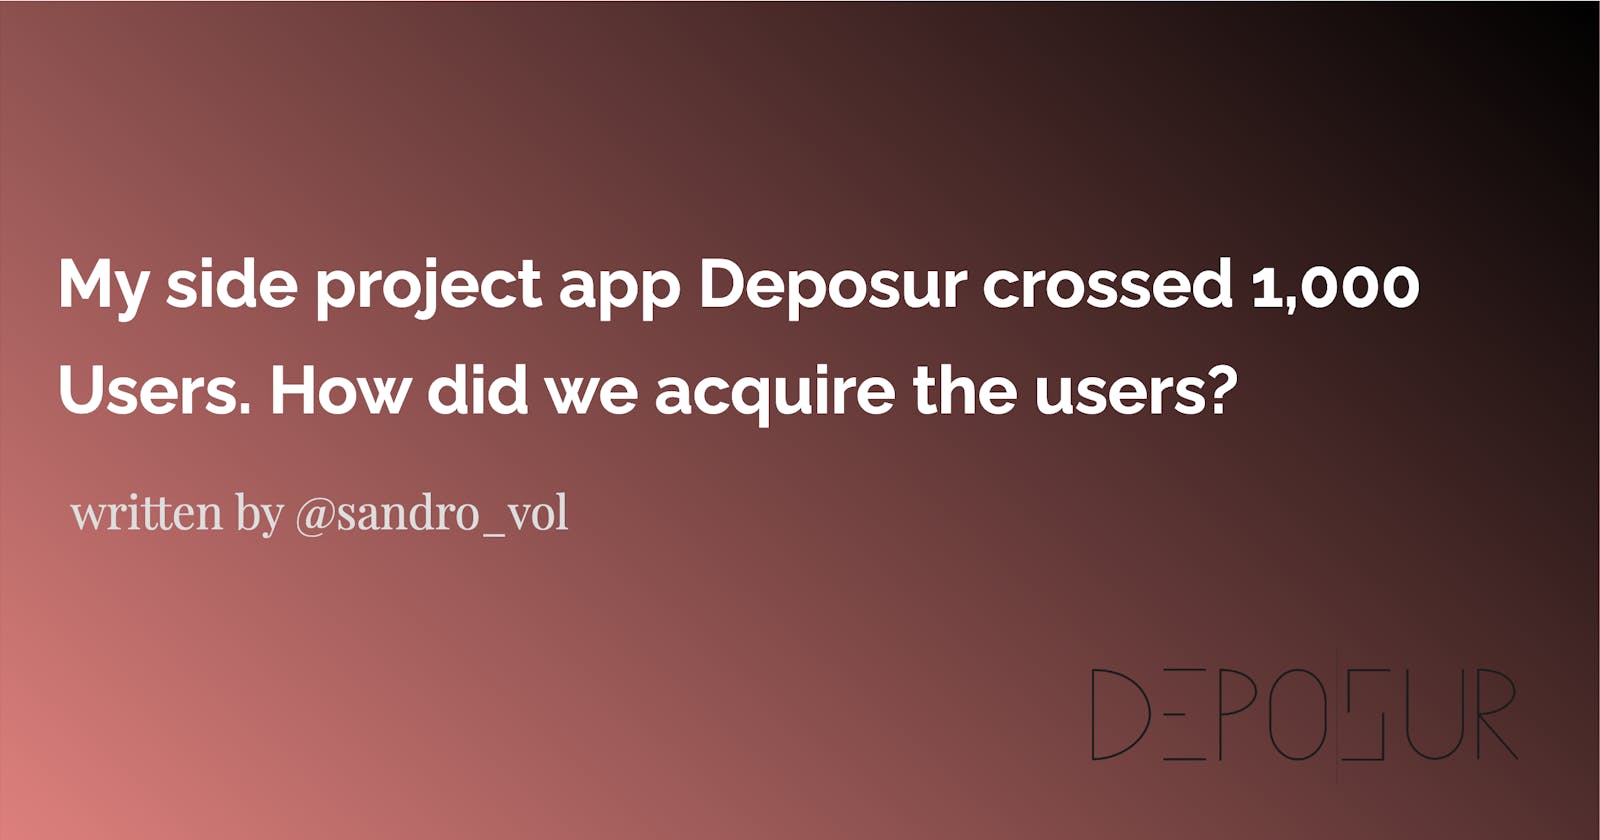 My side project app Deposur crossed 1,000 Users. How did we acquire the users?